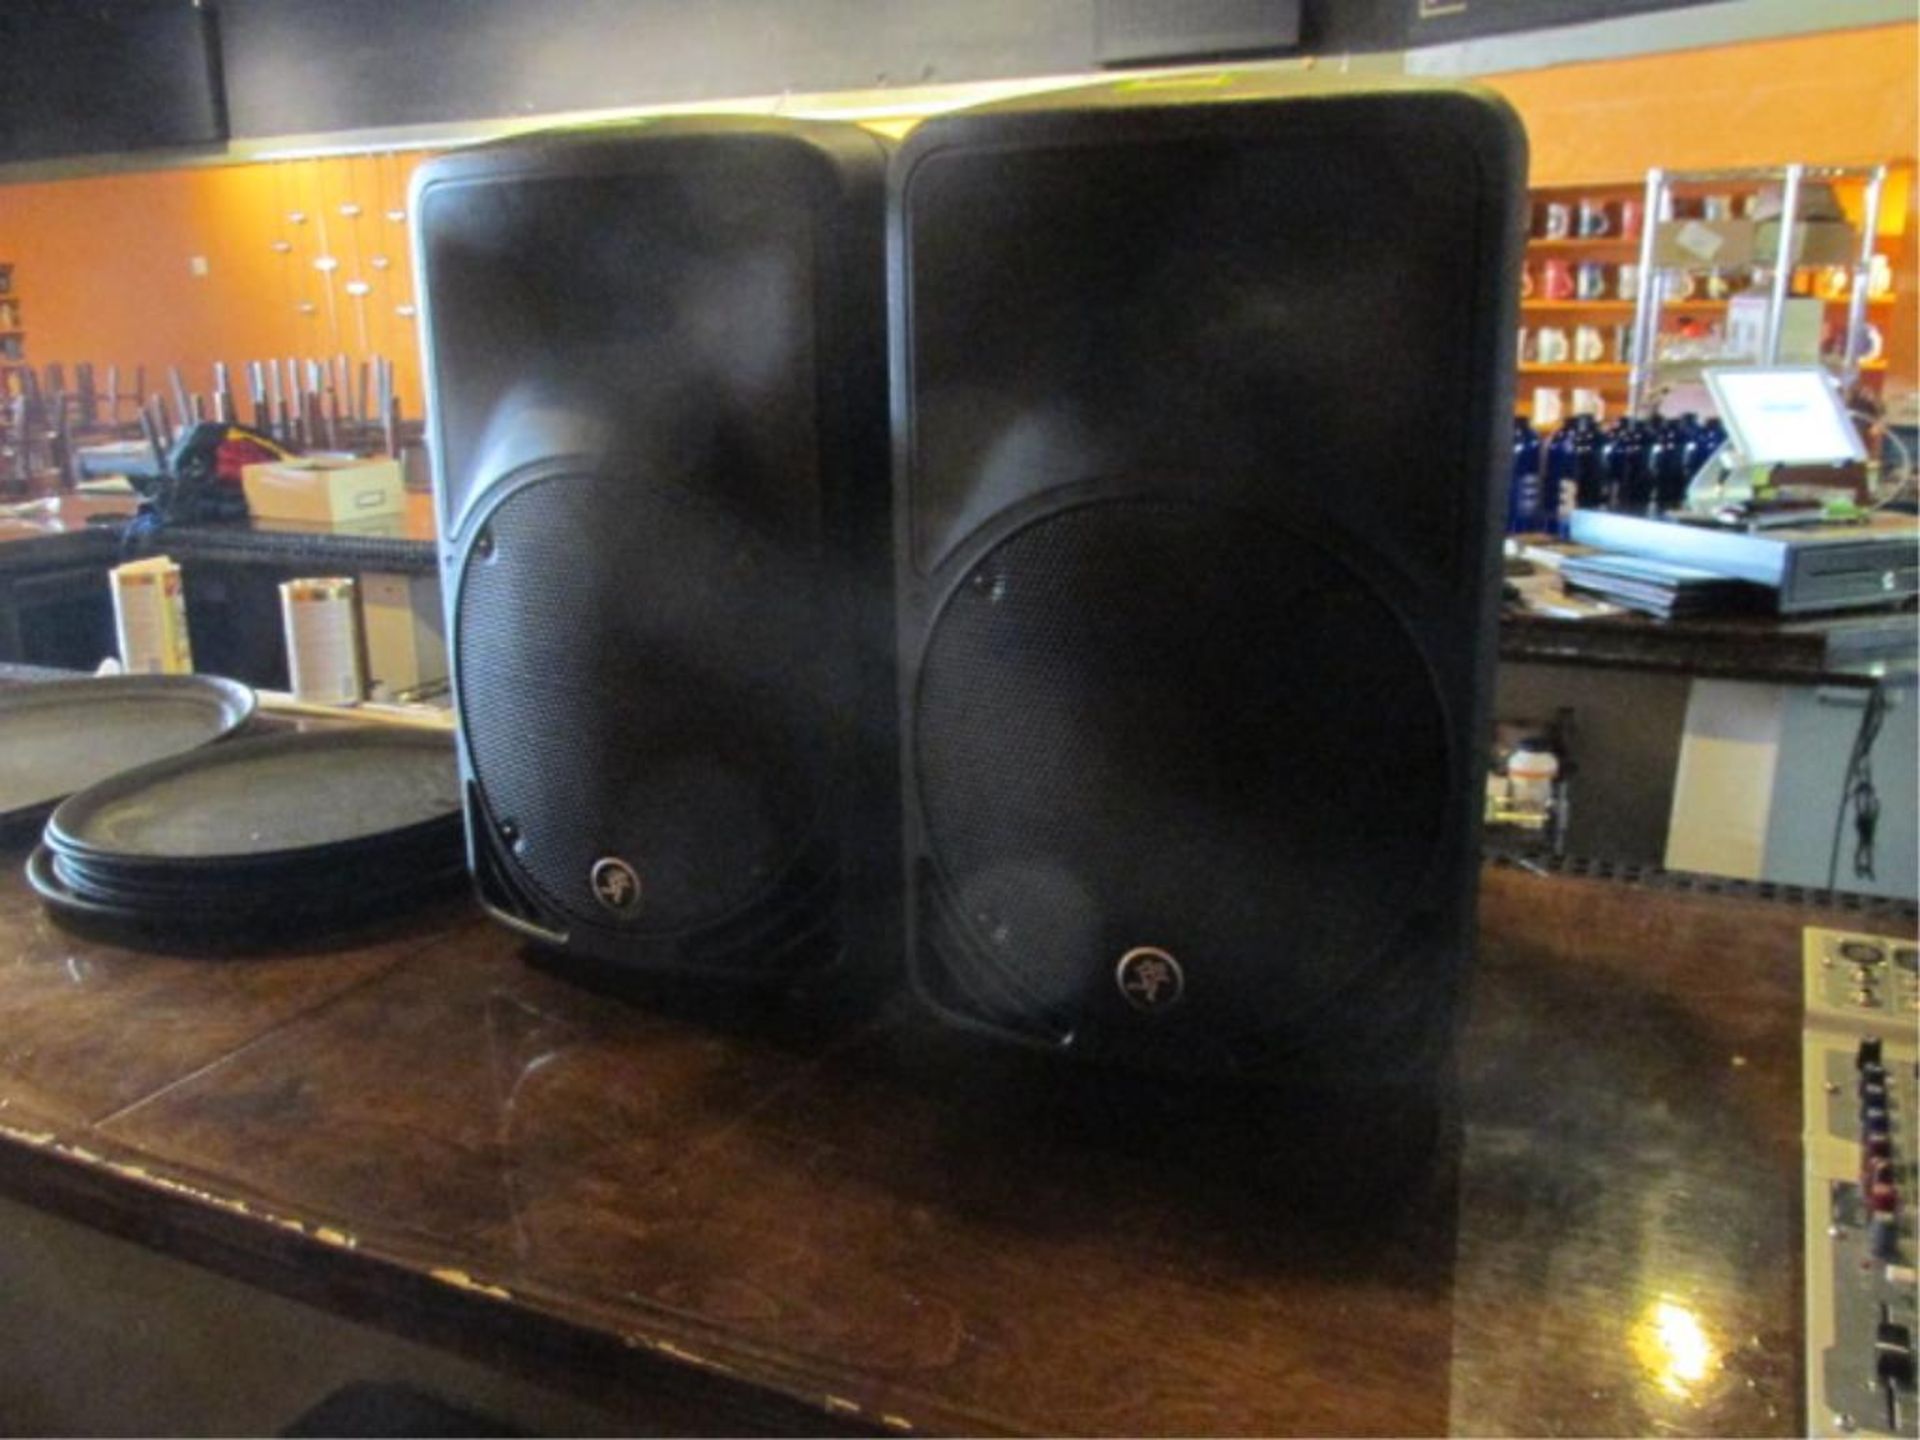 Mackie SRM350 Lot (2) High-Definition Powered Speakers, 1000W & 10". HIT# 2234801. Loc: On Bar. - Image 2 of 3